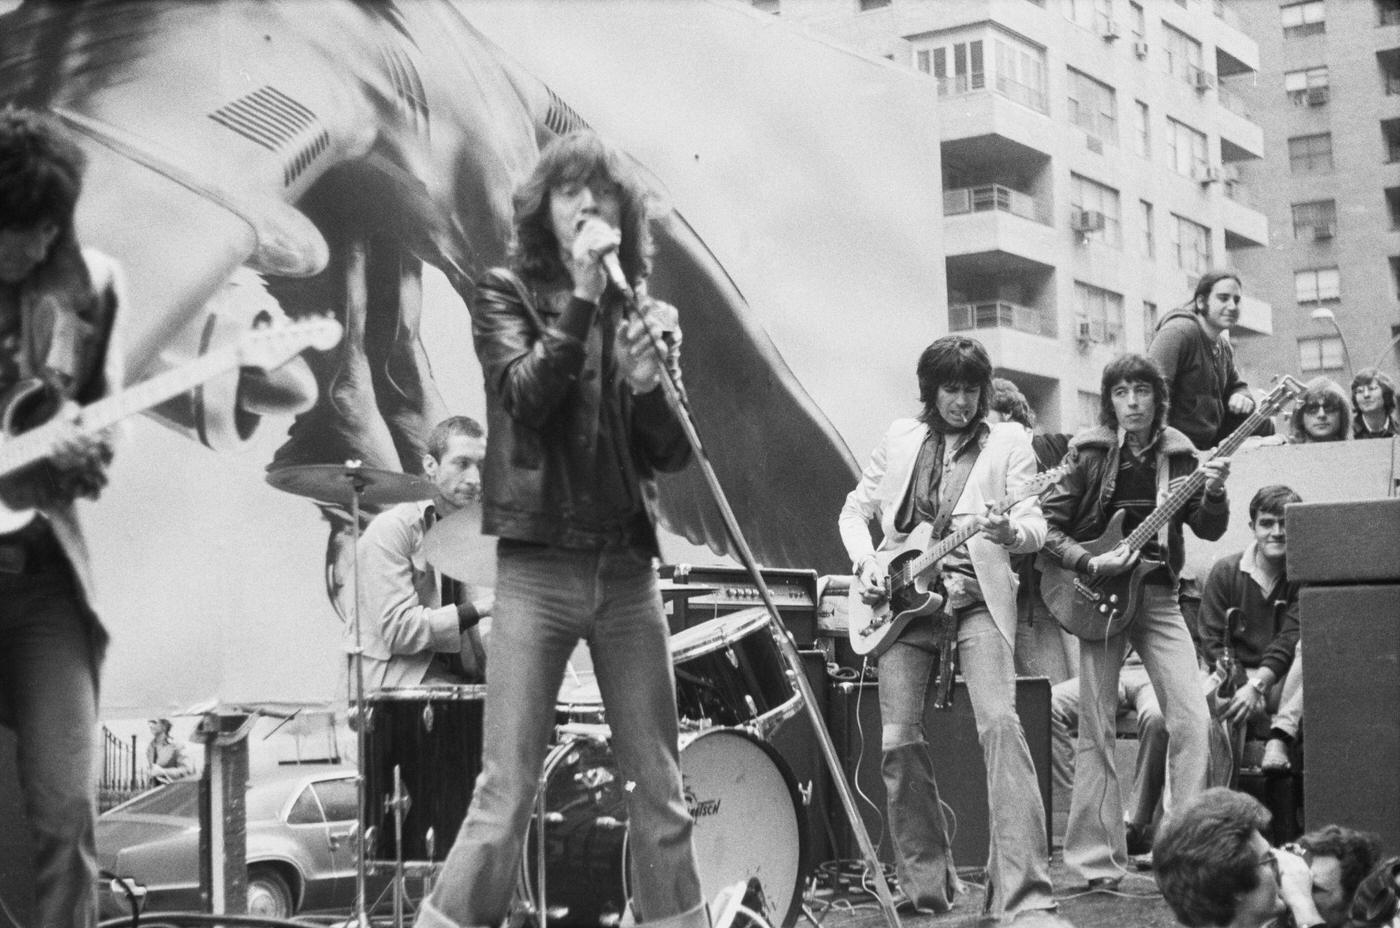 Ronnie Wood, Charlie Watts, Mick Jagger, Keith Richards, and Bill Wyman perform on a flatbed truck on Fifth Avenue, New York City, 1975.